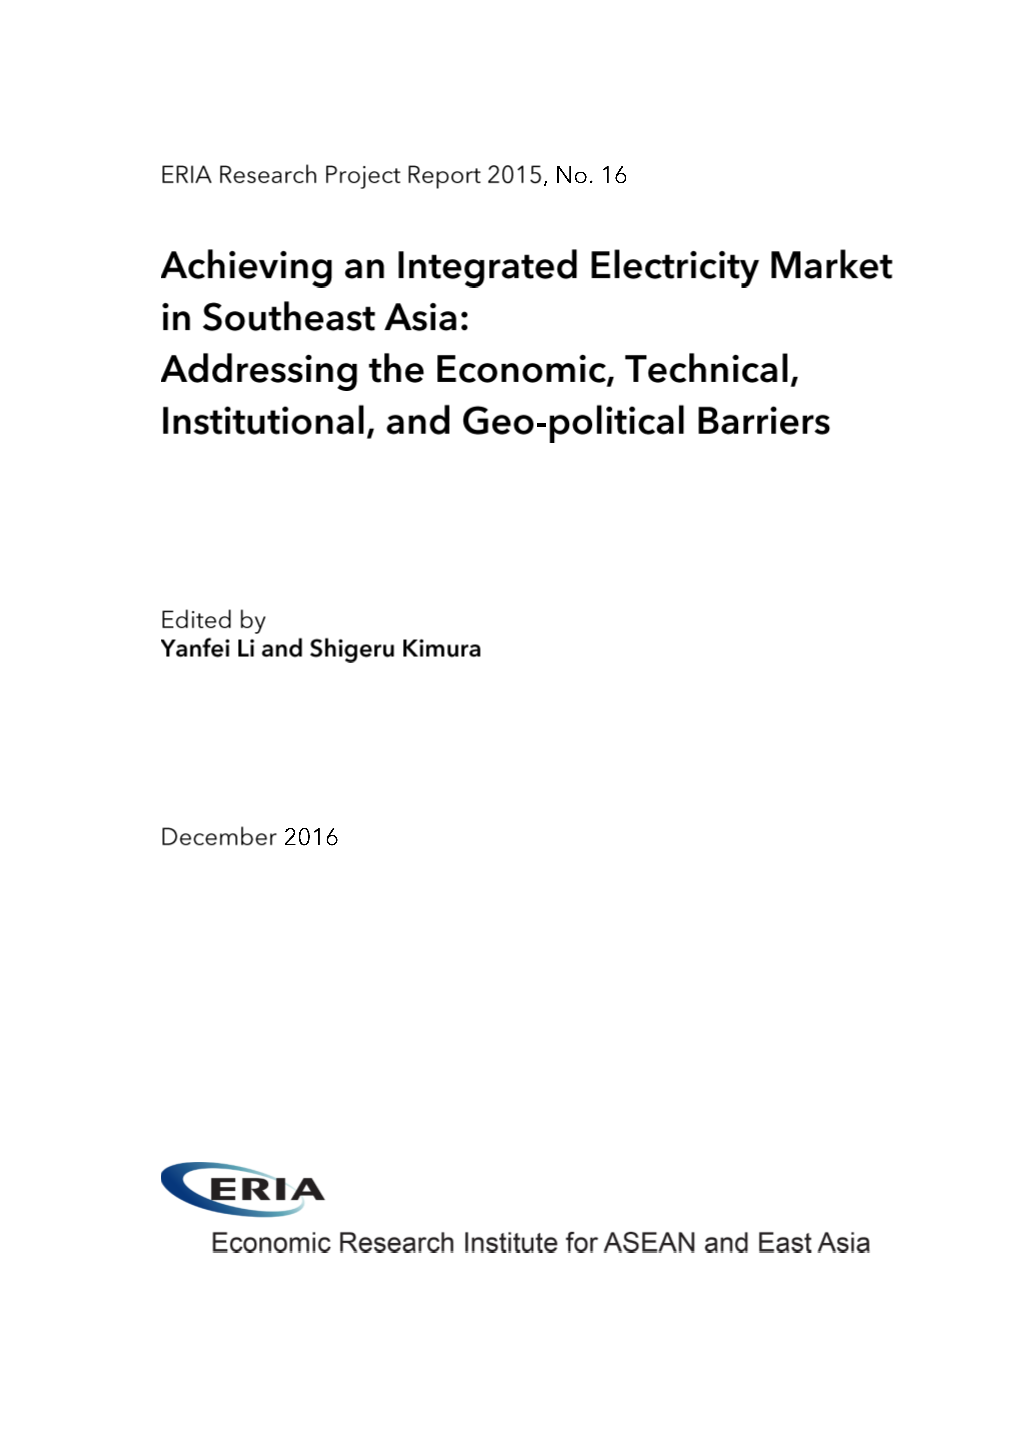 Achieving an Integrated Electricity Market in Southeast Asia